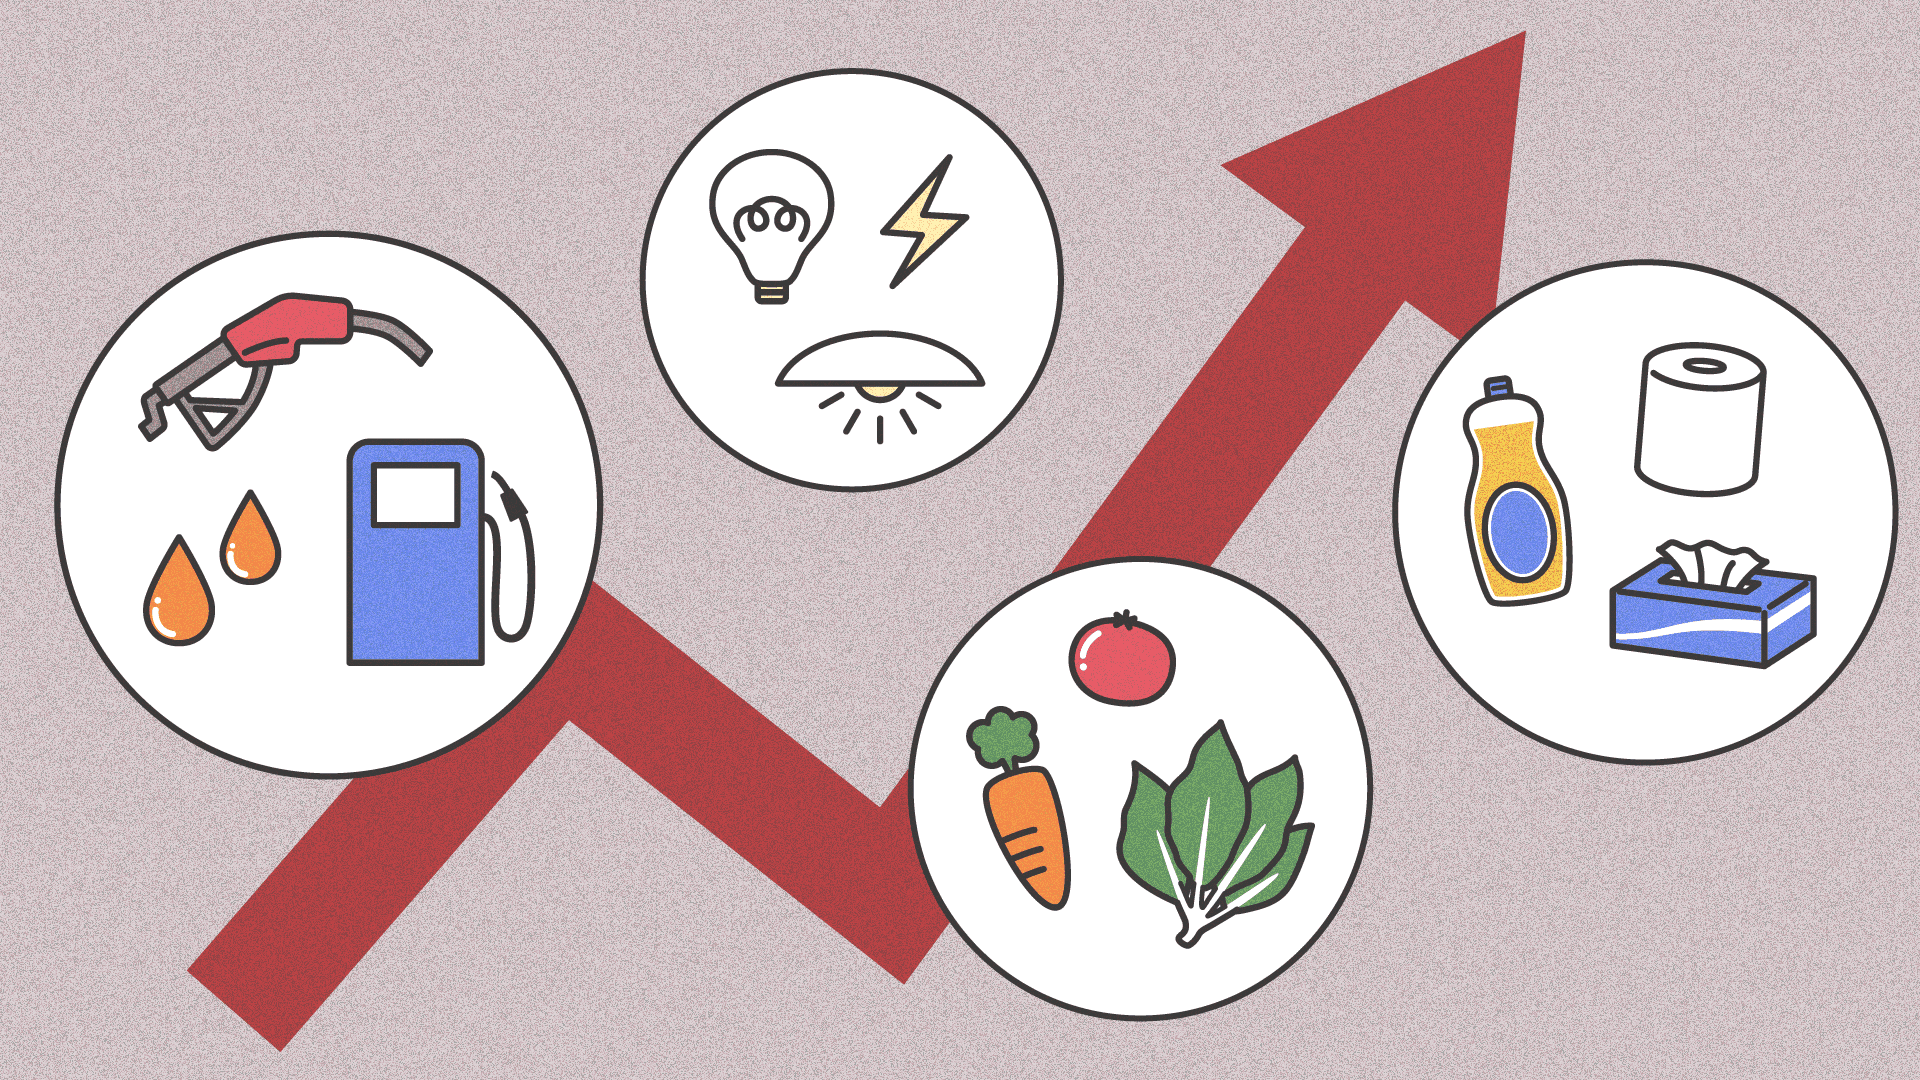 arrow pointing up with icons showing gas, electricity, food and soap/tissues/toilet paper